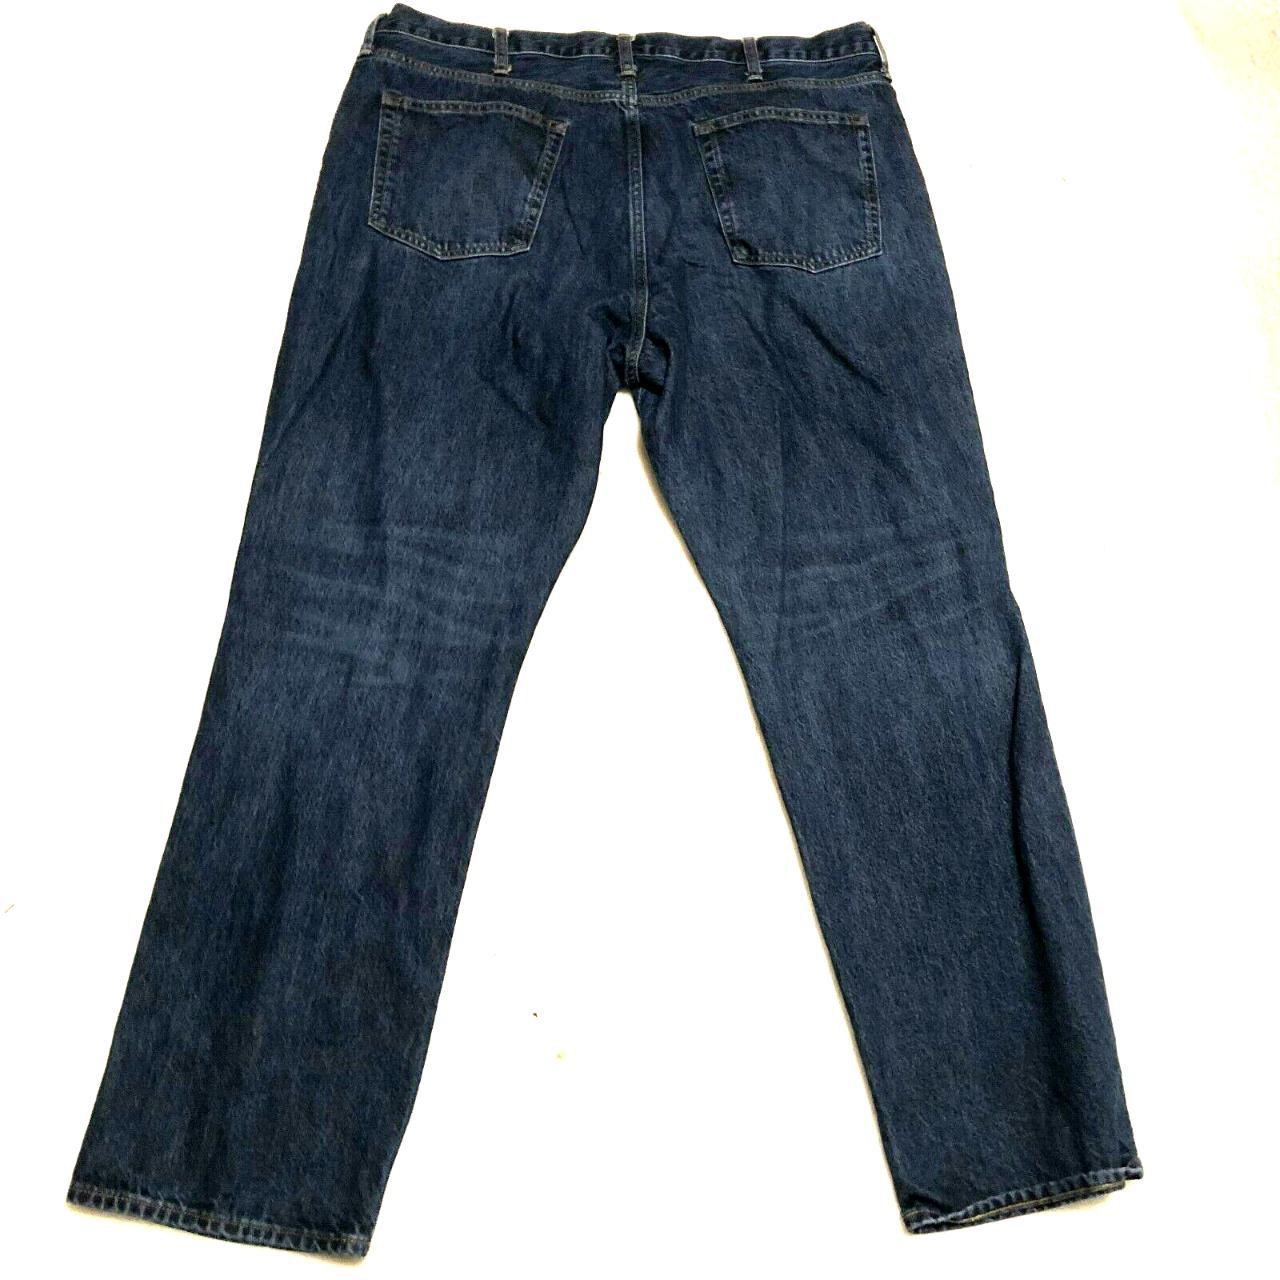 J. CREW CLASSIC RELAXED JEANS SIZE 38 X 32 DARK WASH... - Depop